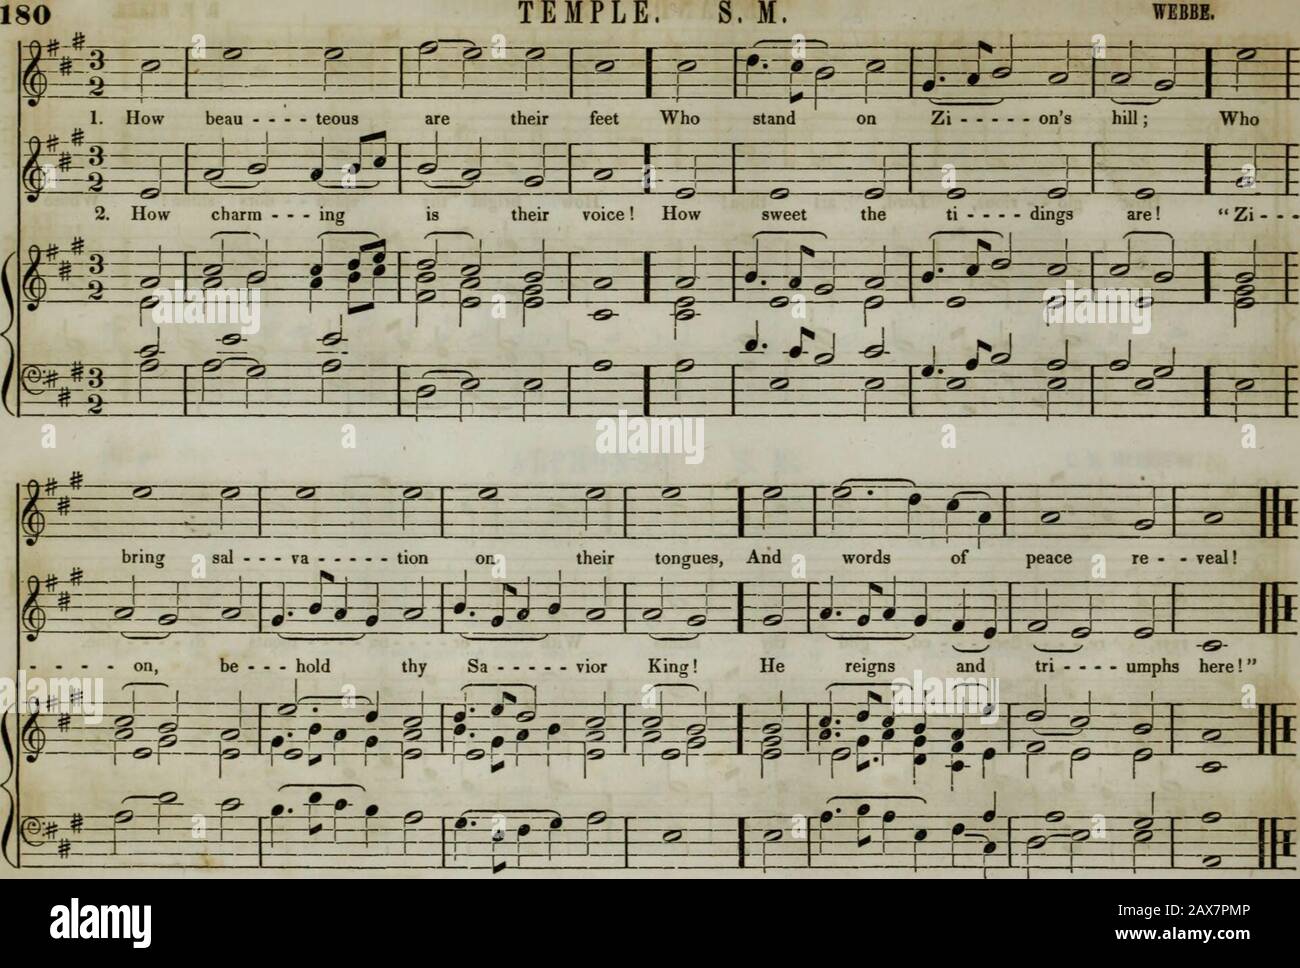 The Boston Musical Education Society's collection of church music : consisting of original psalm and hymn tunes, select pieces, chants, &c.; including compositions adapted to the service of the Protestant Episcopal Church . 44 f WARREN. S. M. e. l. white. 181 Fl—T # * =1—f 1 m I ? mm m calls And 1 st in - &gt; —I—I—[J JJ d-+ -Hi -#- dev. —tx J r -|--fi i j.. j 1 — tl J • & I I d Jn r j j lr? r r r rr f -—+»—d j. j . n? - O-0 1 0 * 4—f—1 -J-Mf * 60 • 181 RUTLAND. S. M. Arranged from CORELLI. ? 1 * *^ &gt; * ••?•V % - #—4—^ Wel- come, sweet1 J day of rest, That saw the Lord a - - - rise; Wei - Stock Photo